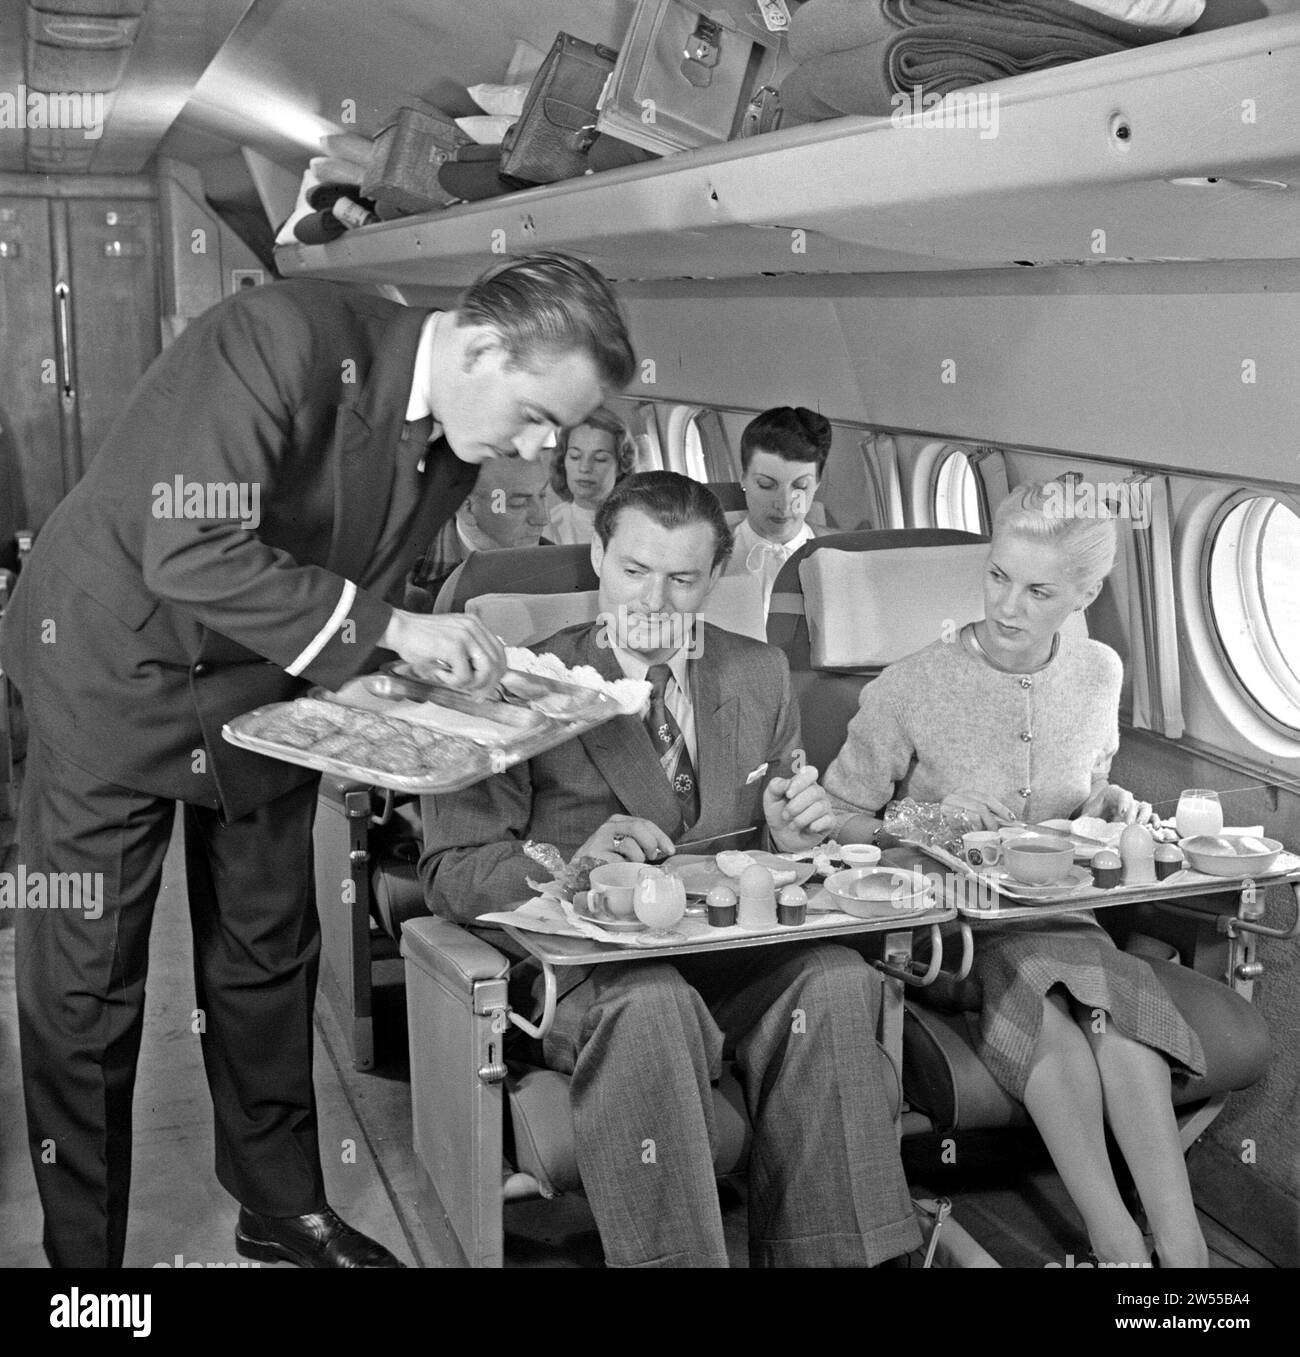 A KLM purser serves the meal during the flight in a KLM passenger plane ca. 1950 Stock Photo